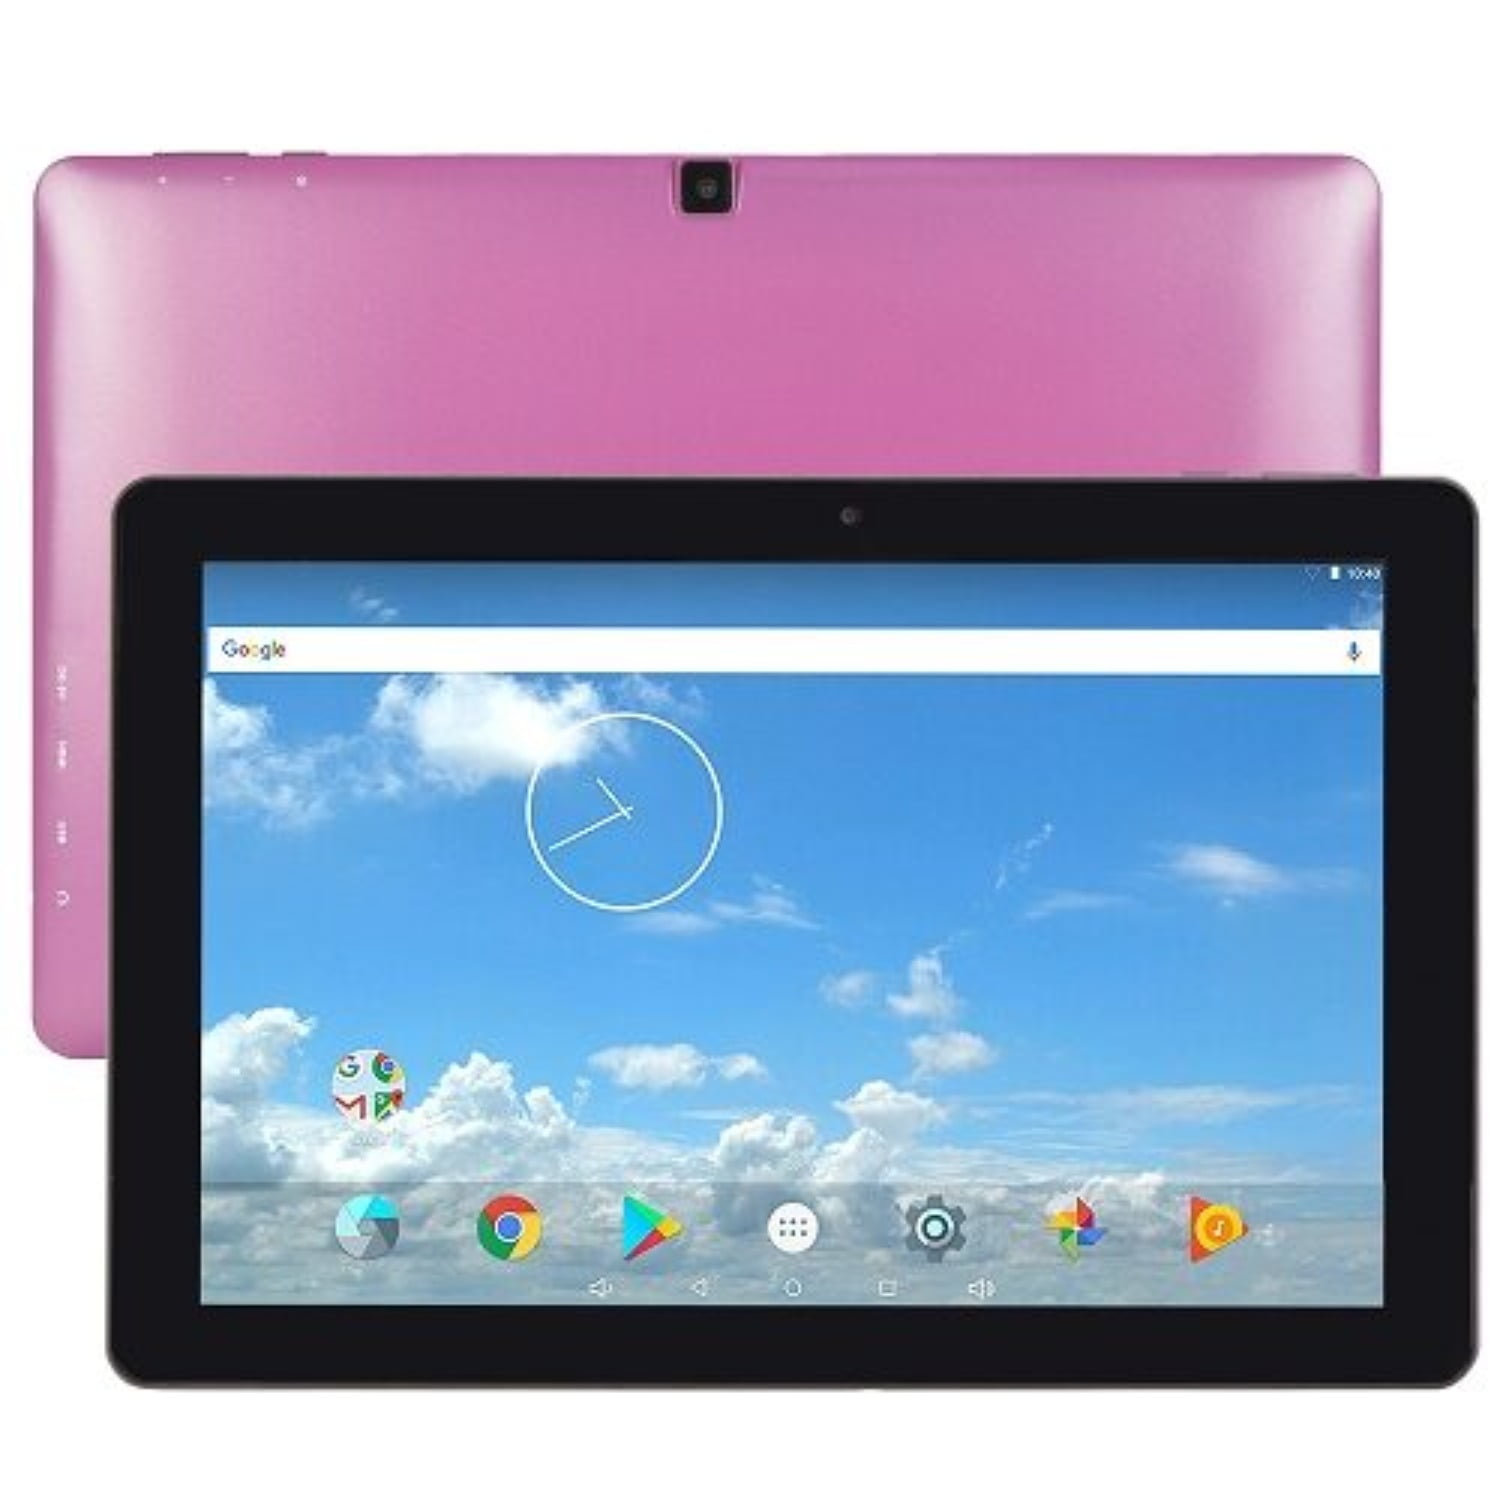 iView 1070TPCII 10.1", 1280 × 800 IPS High Resolution, Android 7.1 Nougat, Quad Core Processor, Cortex A53 1.2GHz, 1GB DDR3/16GB Tablet